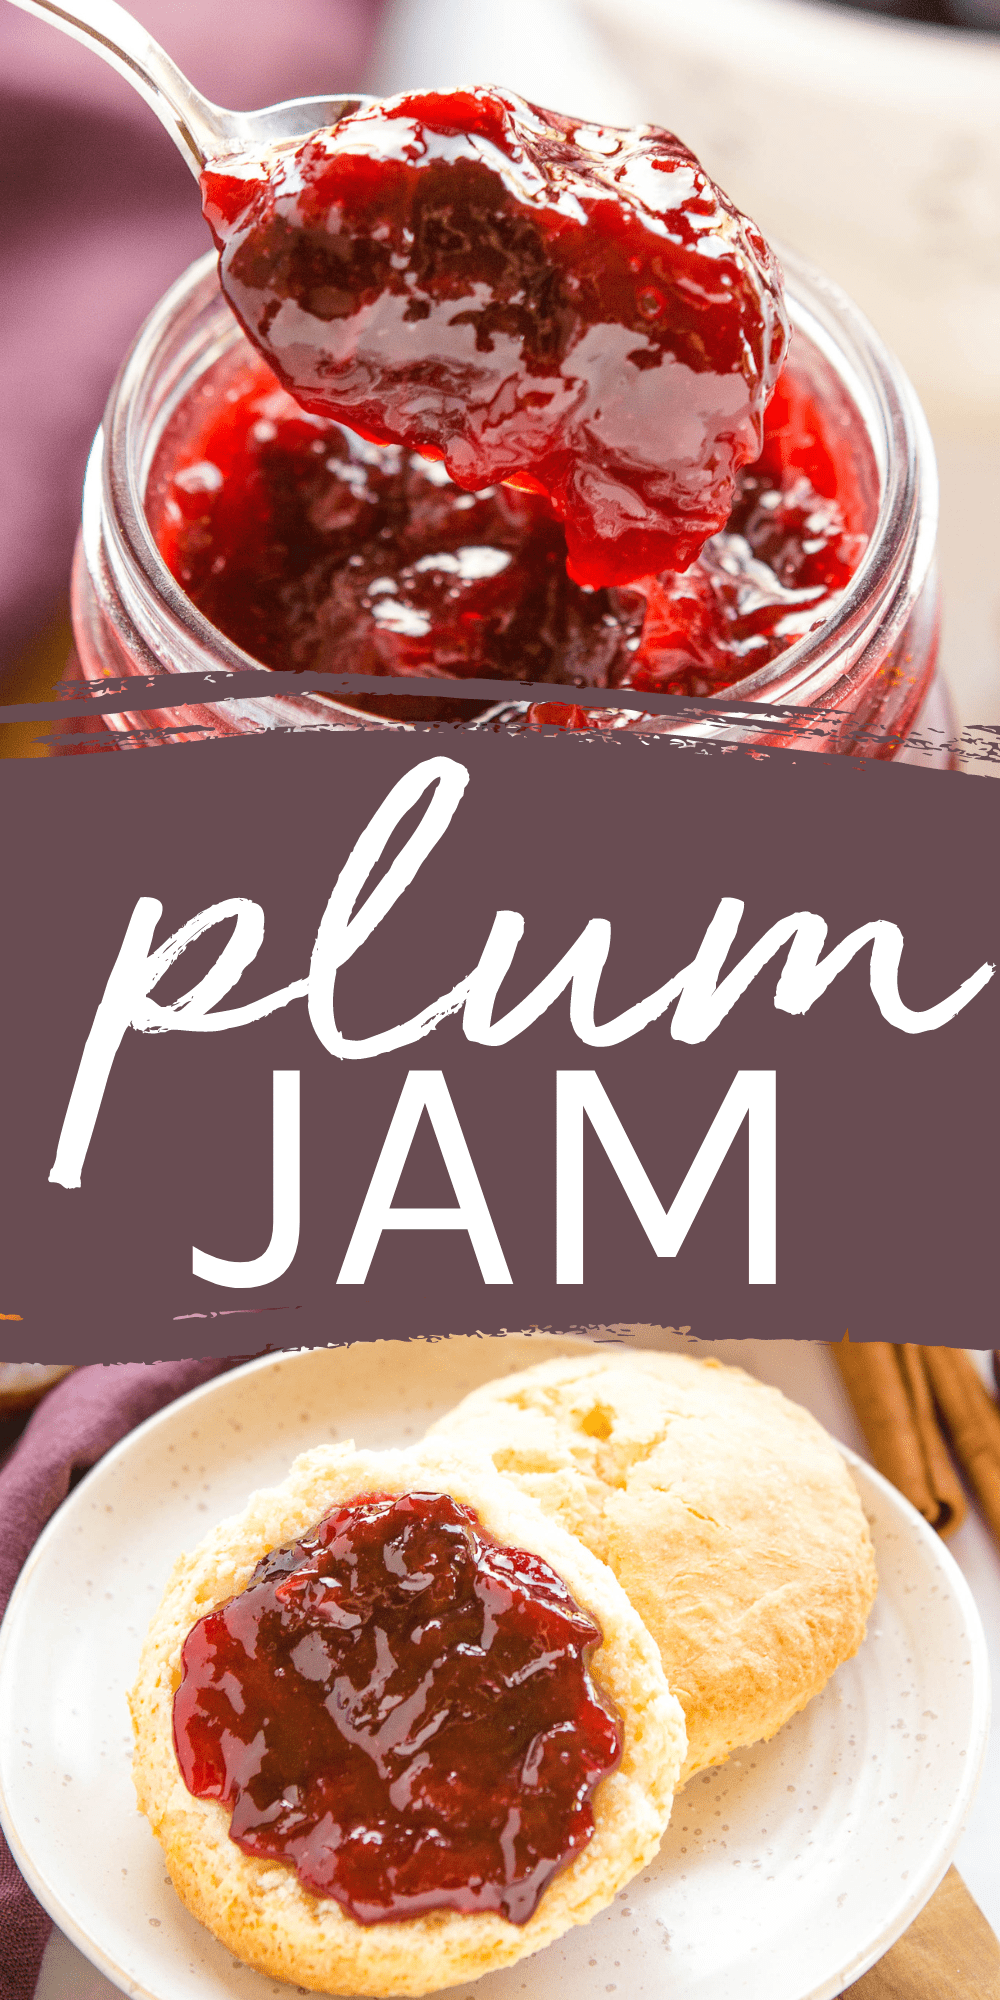 This Plum Jam is an easy homemade jam recipe using fresh, in-season plums. Sweet and smooth, simple to make and perfect on buttered toast or scones. An easy jam recipe with 4 basic ingredients and pro tips for beginners! Recipe from thebusybaker.ca! #plumjam #homemadejam #easyjamrecipe #freezerjam #fridgejam #homemadejamrecipe #jamrecipe #plumjamrecipe #easyhomemadejamtips #jamforbeginners via @busybakerblog